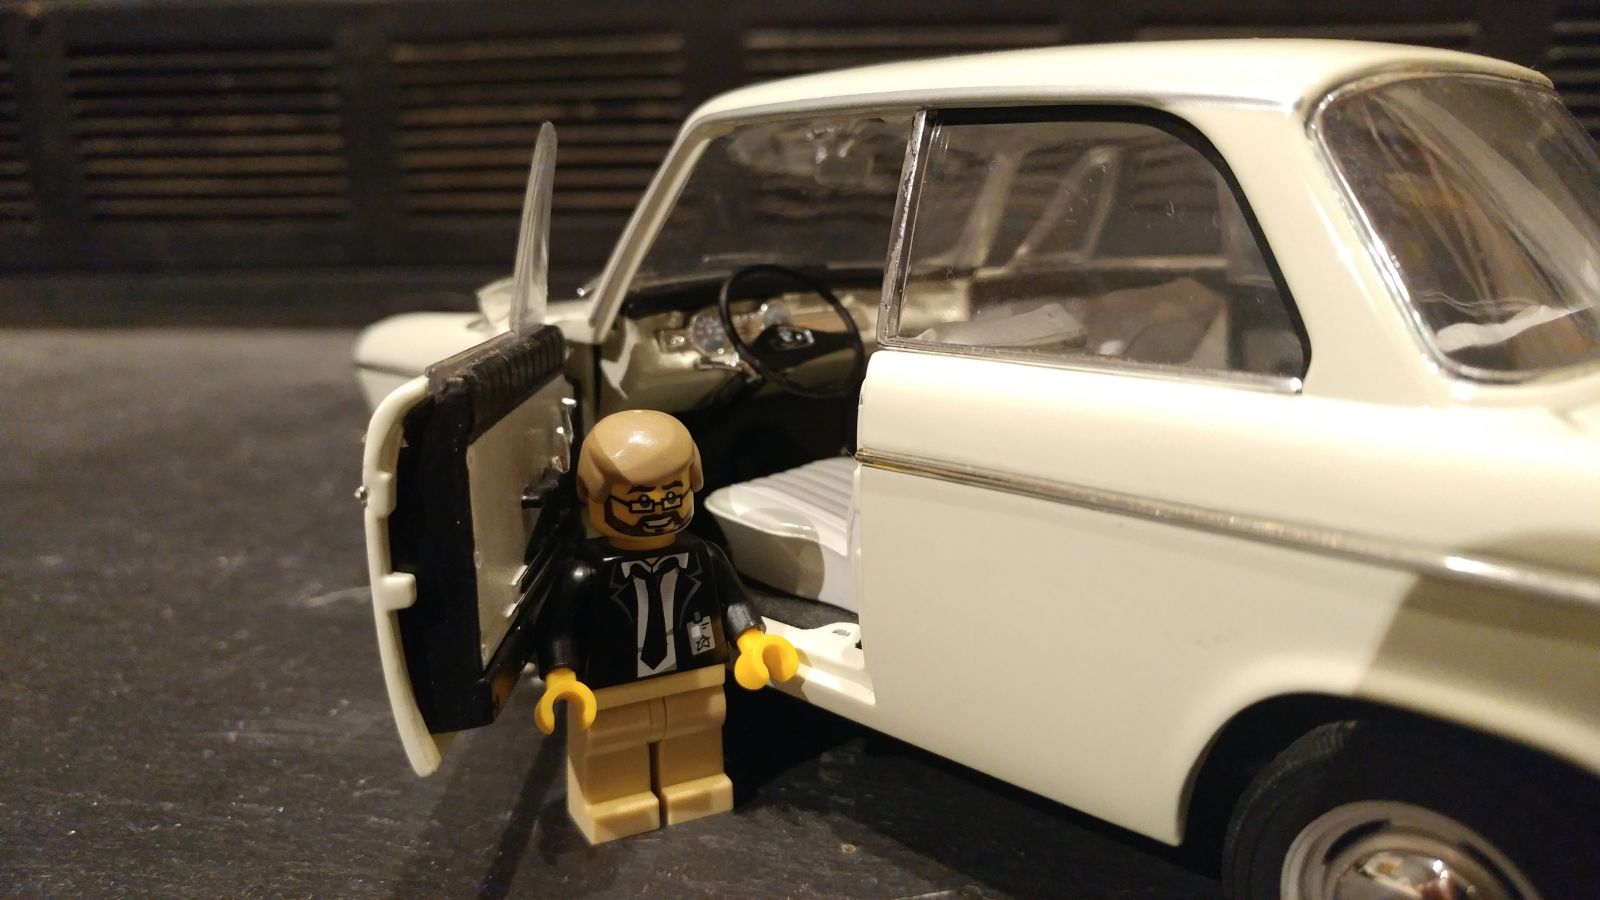 Illustration for article titled Teutonic Tuesday: BMW 700 Luxus, the Lego Chris Bangle Review